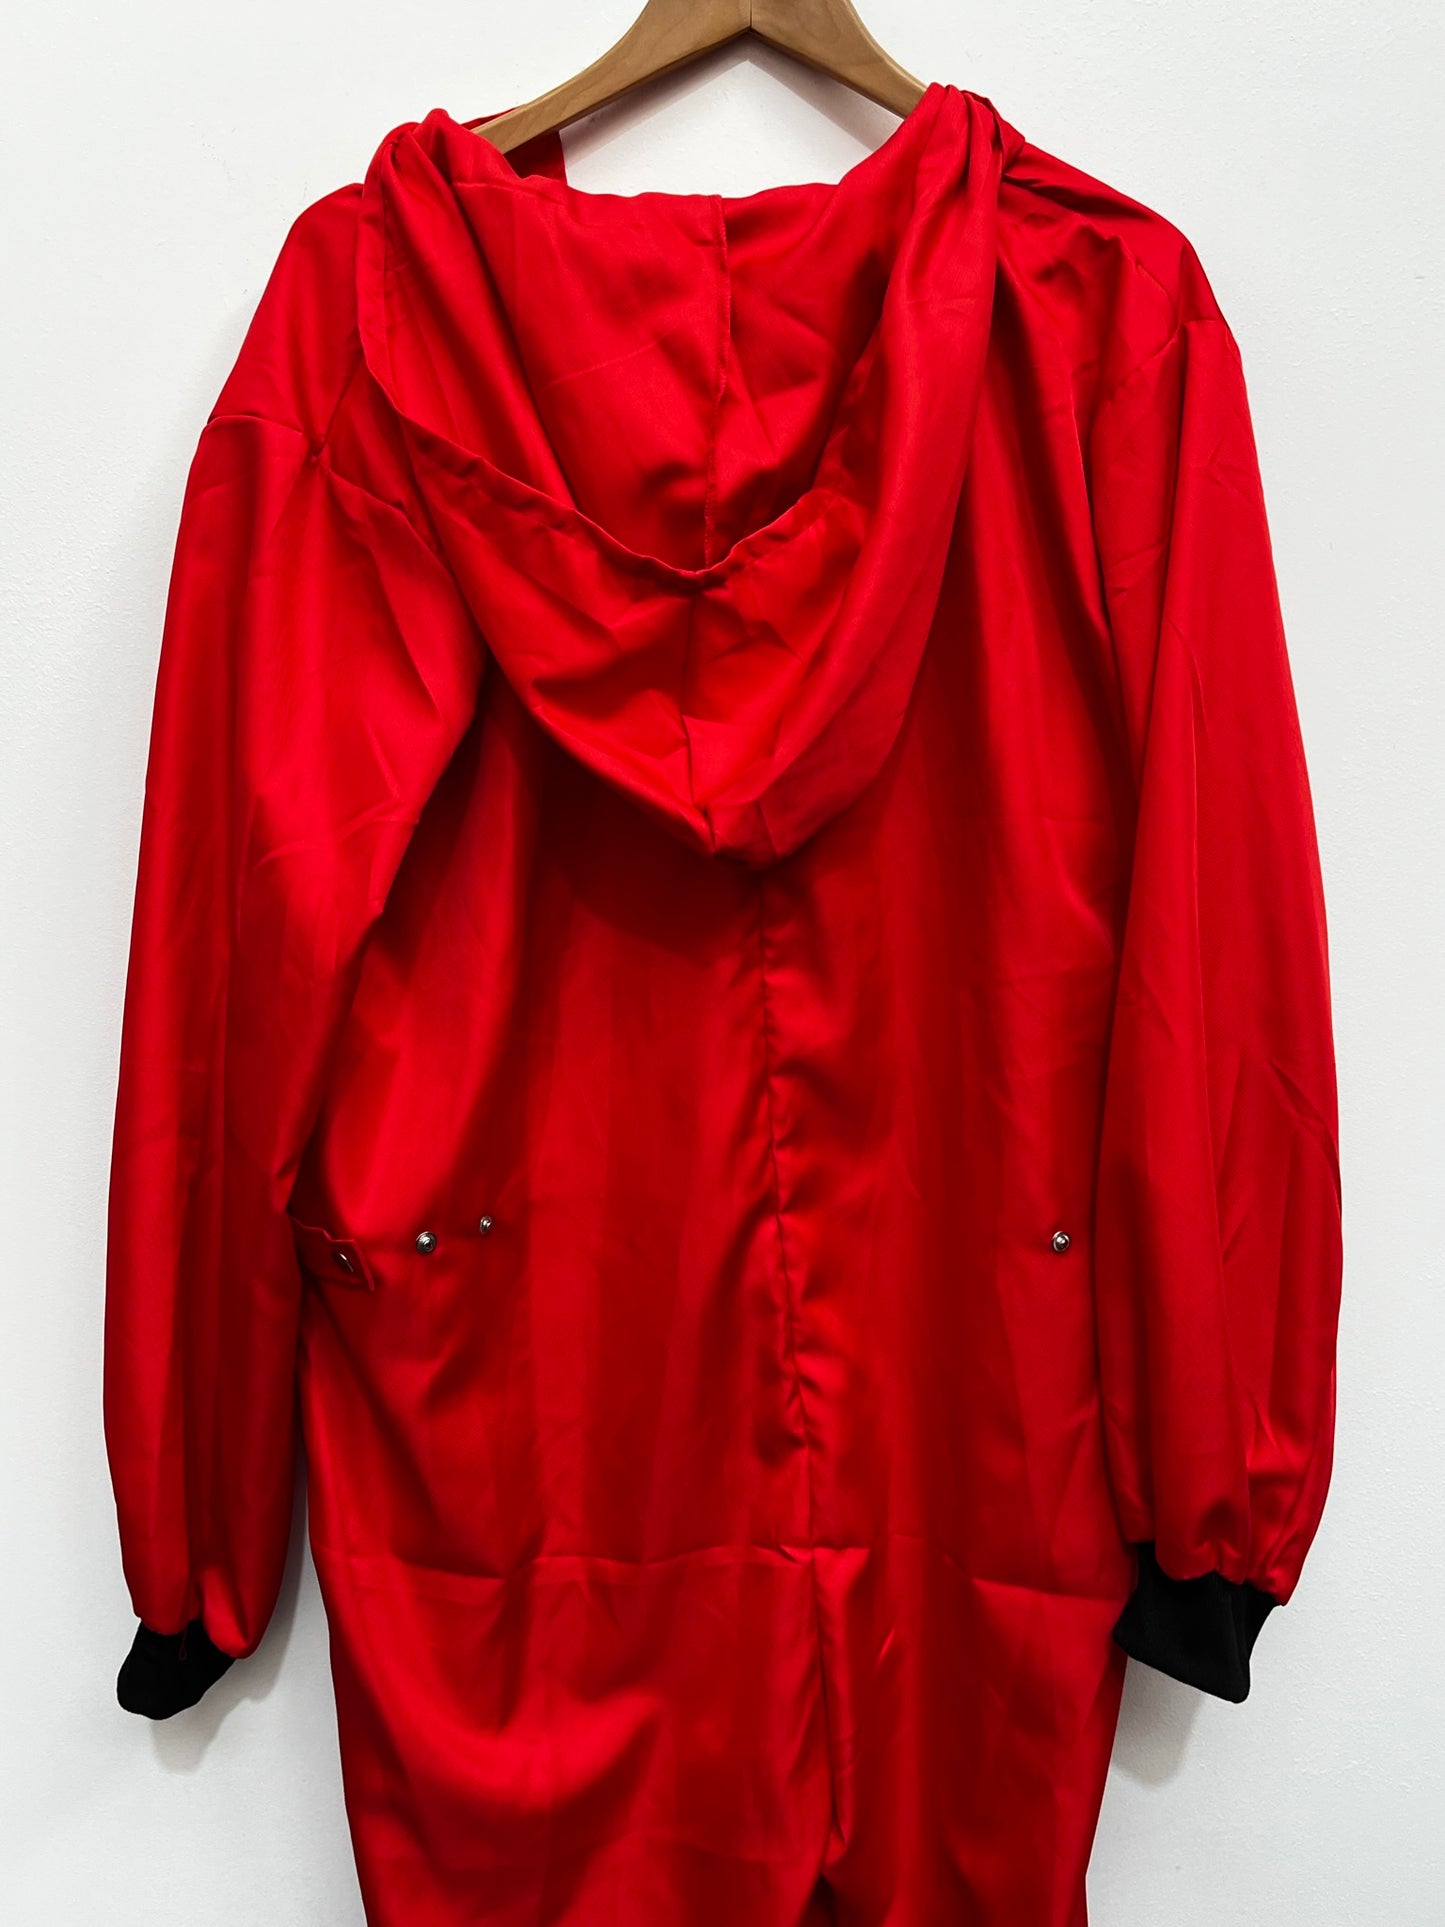 Red Money Heist Costume with Accessories Size Large - Ex Hire